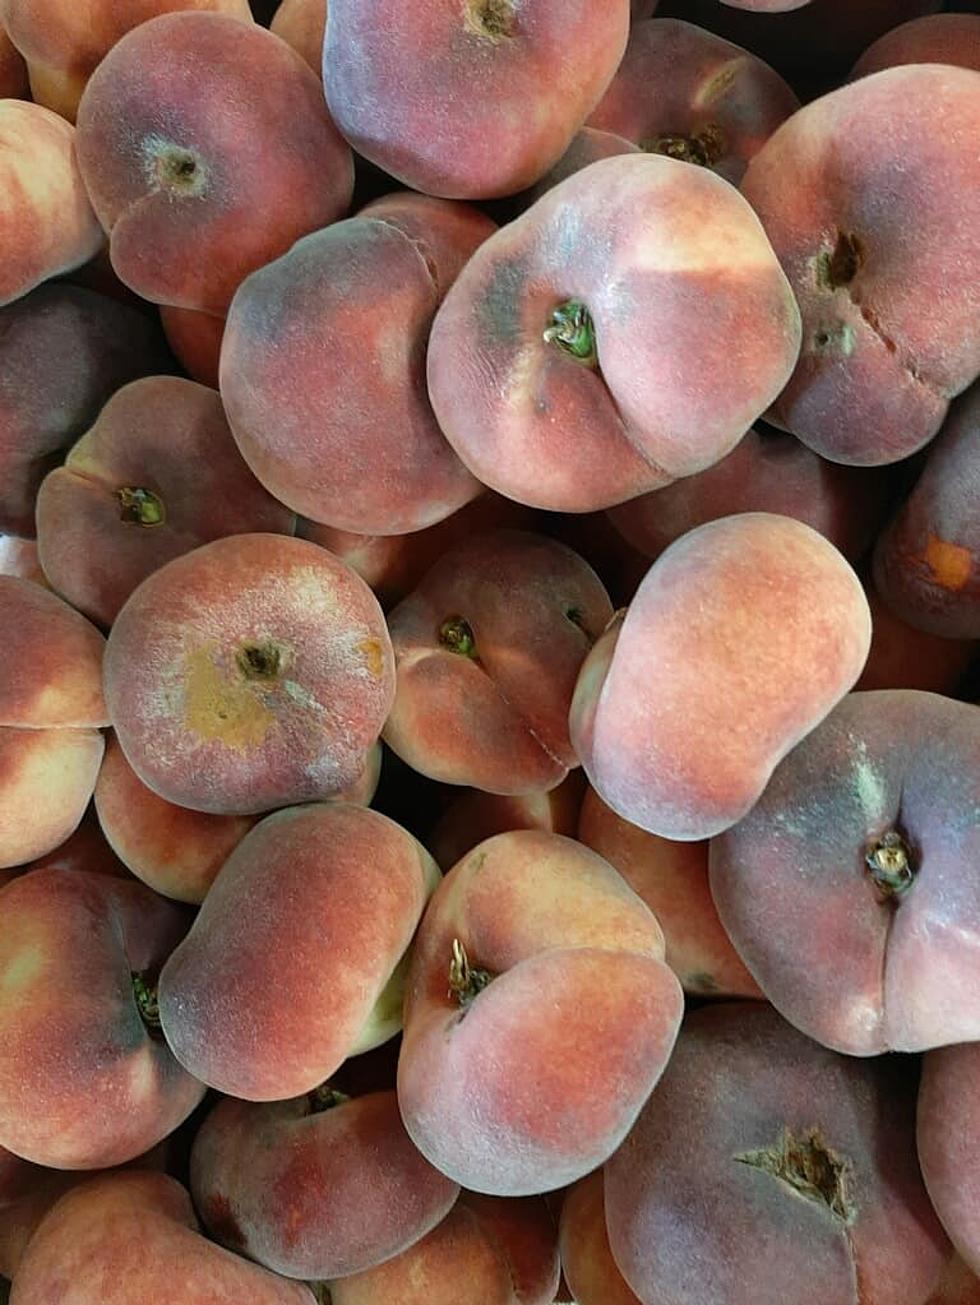 Utica/Rome 'Donut Peaches' are Juicy and Candy Sweet 